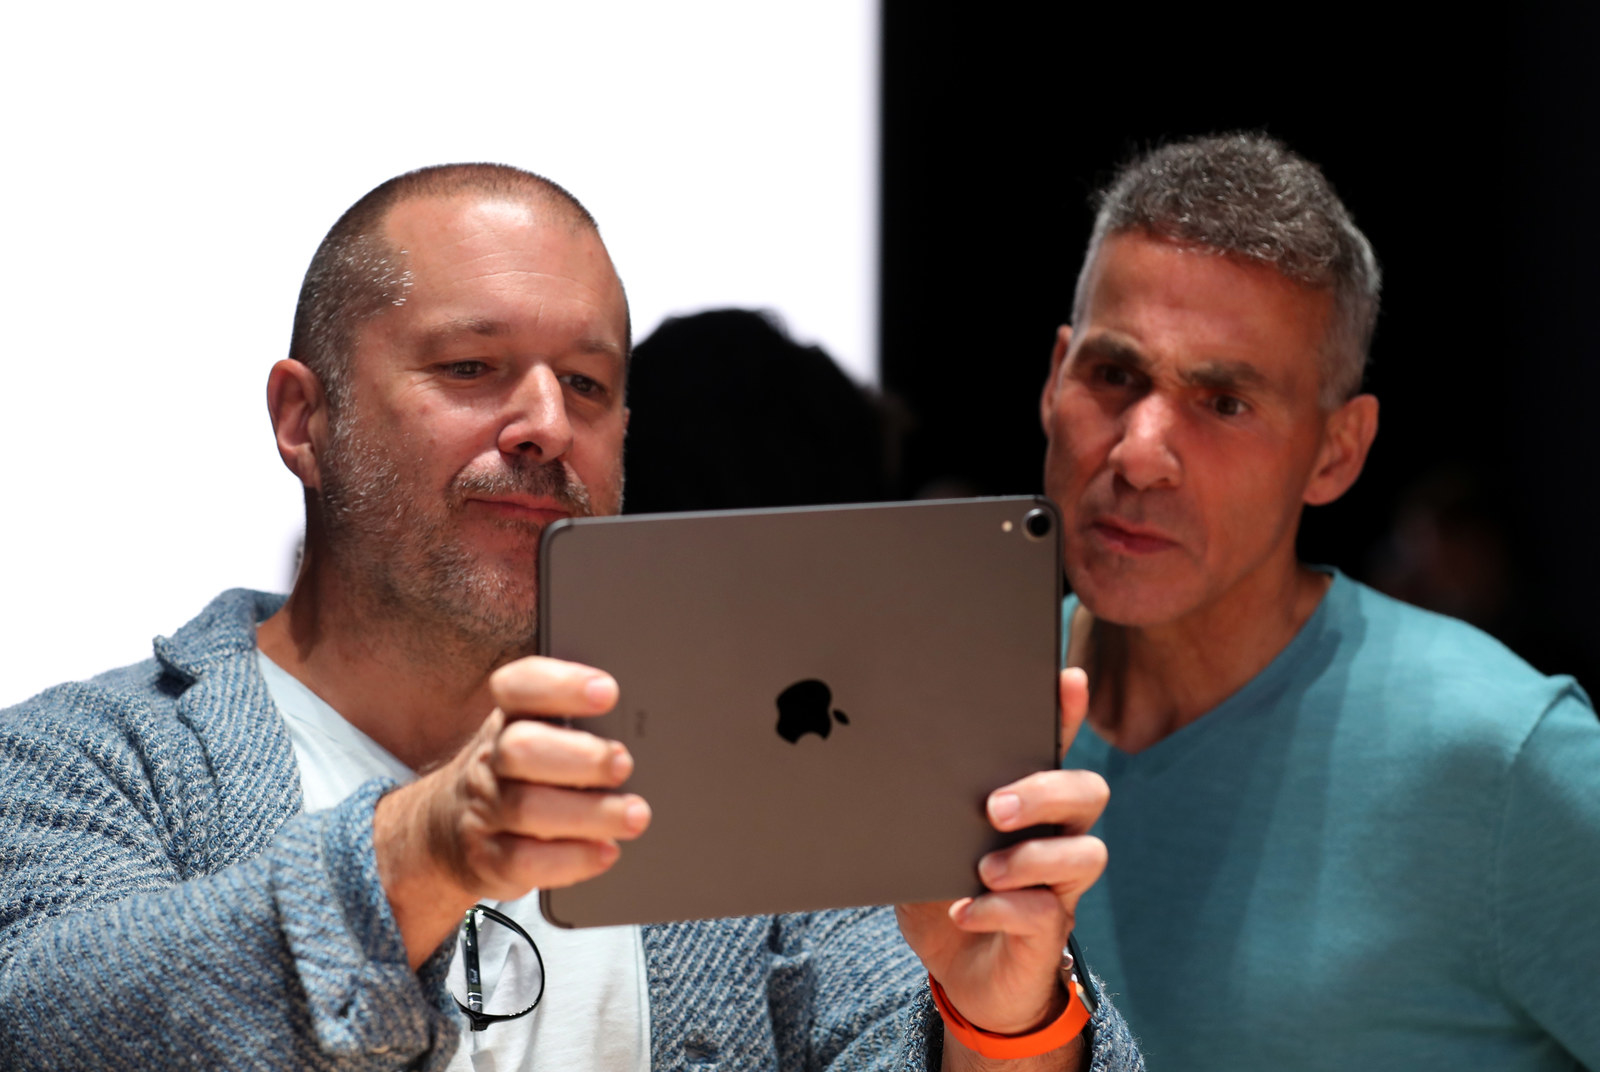 Jony Ive And Marc Newson Customize An Unreleased Mac Pro For (RED